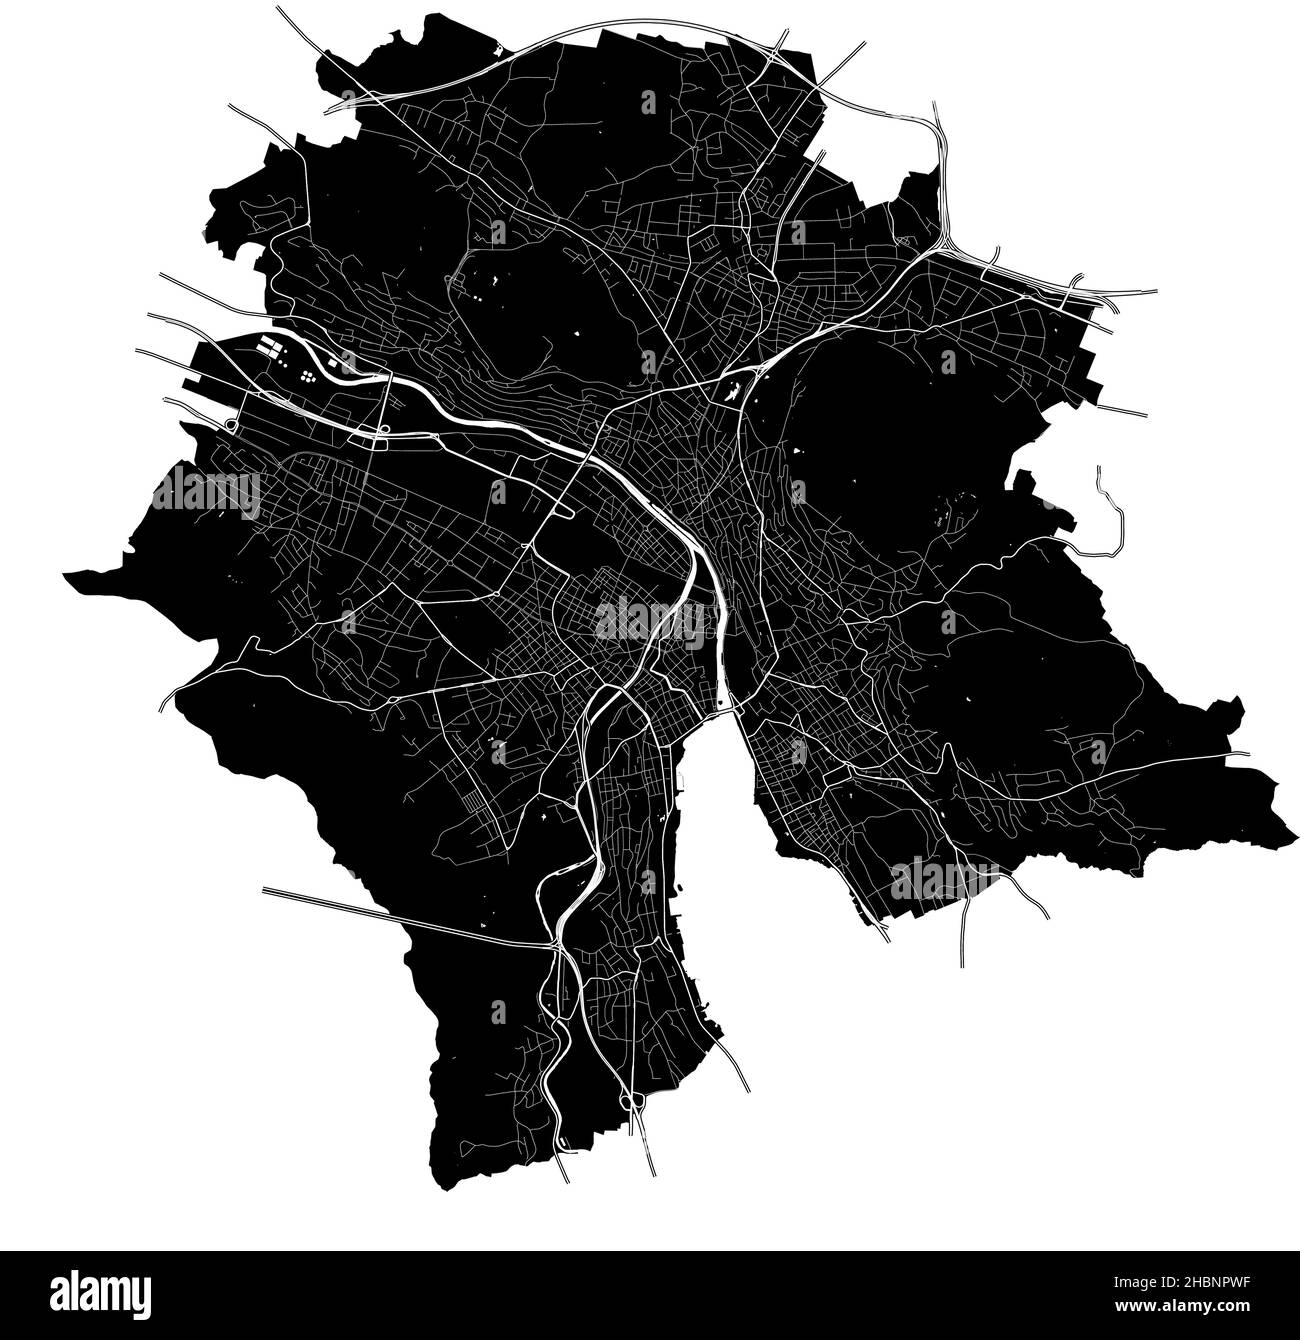 Zürich, Switzerland, high resolution vector map with city boundaries, and editable paths. The city map was drawn with white areas and lines for main r Stock Vector